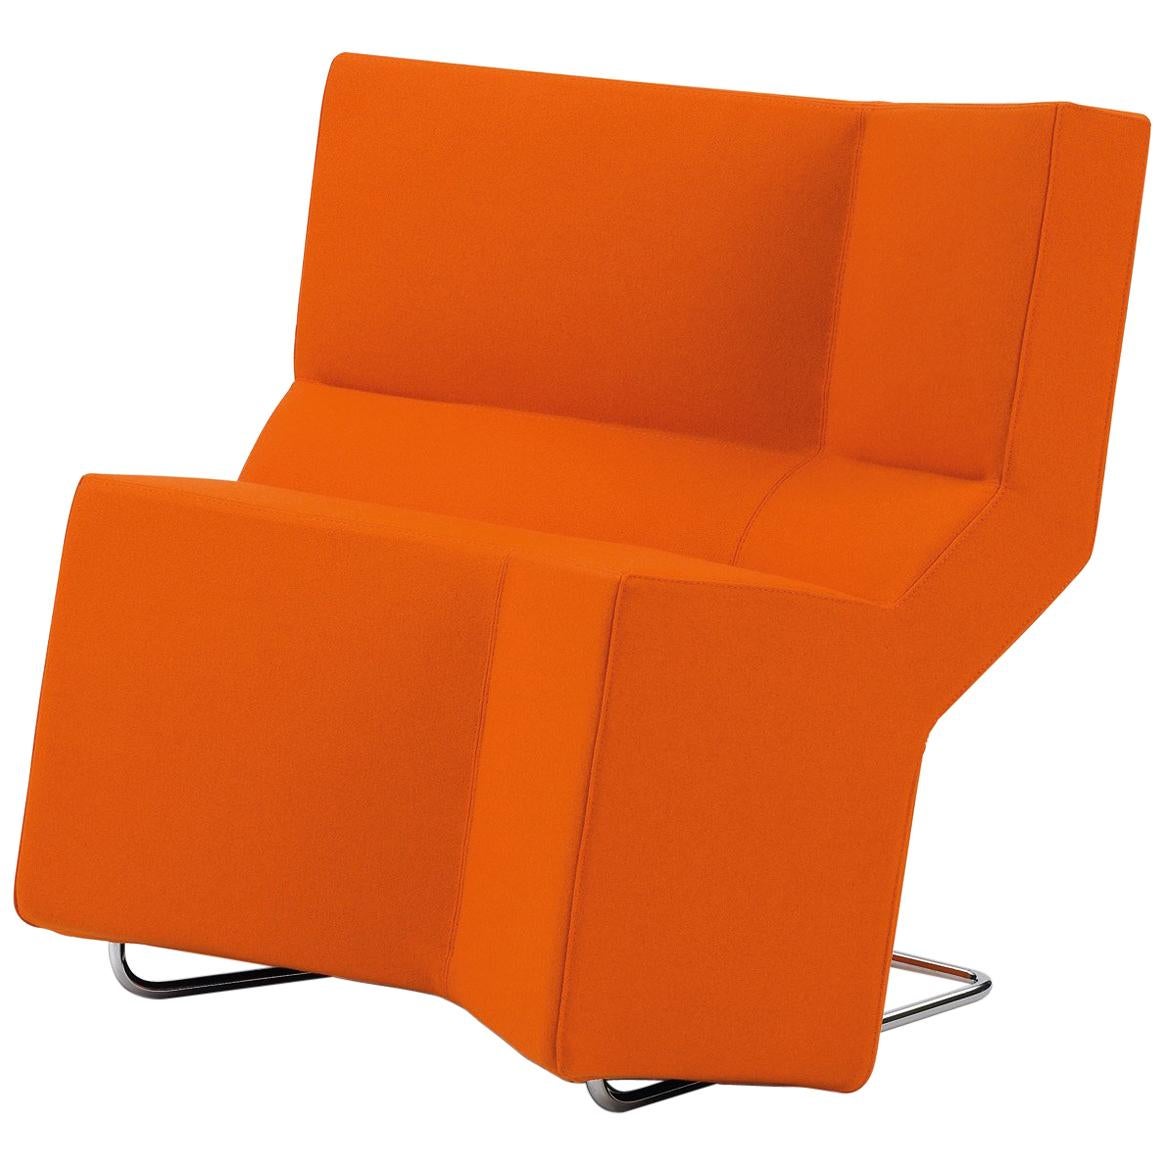 Customizable ClassiCon Chaos Chair  by Konstantin Grcic